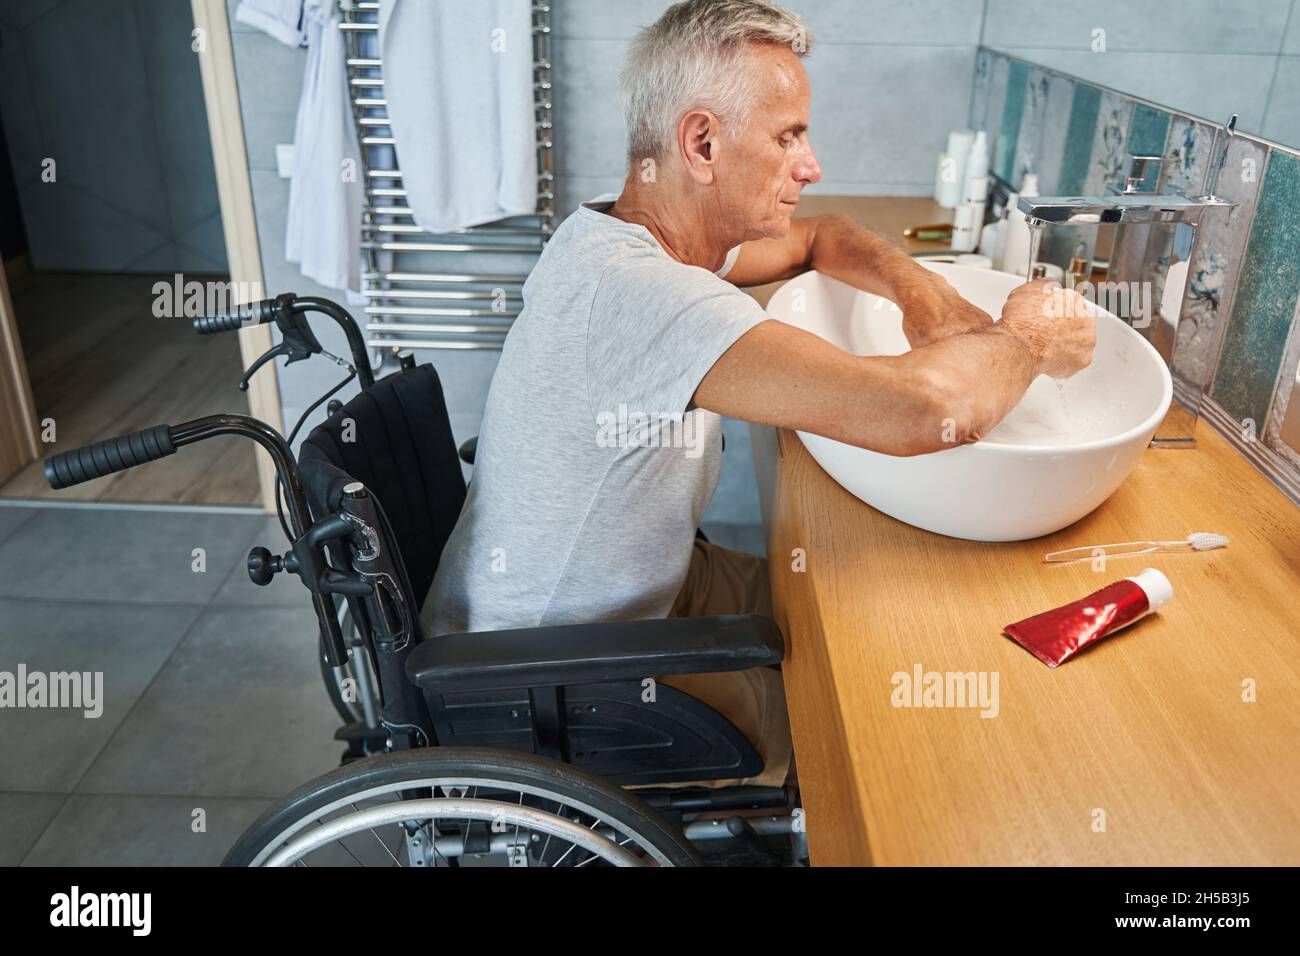 Aged man with physical disability cleaning hands in sink Stock Photo